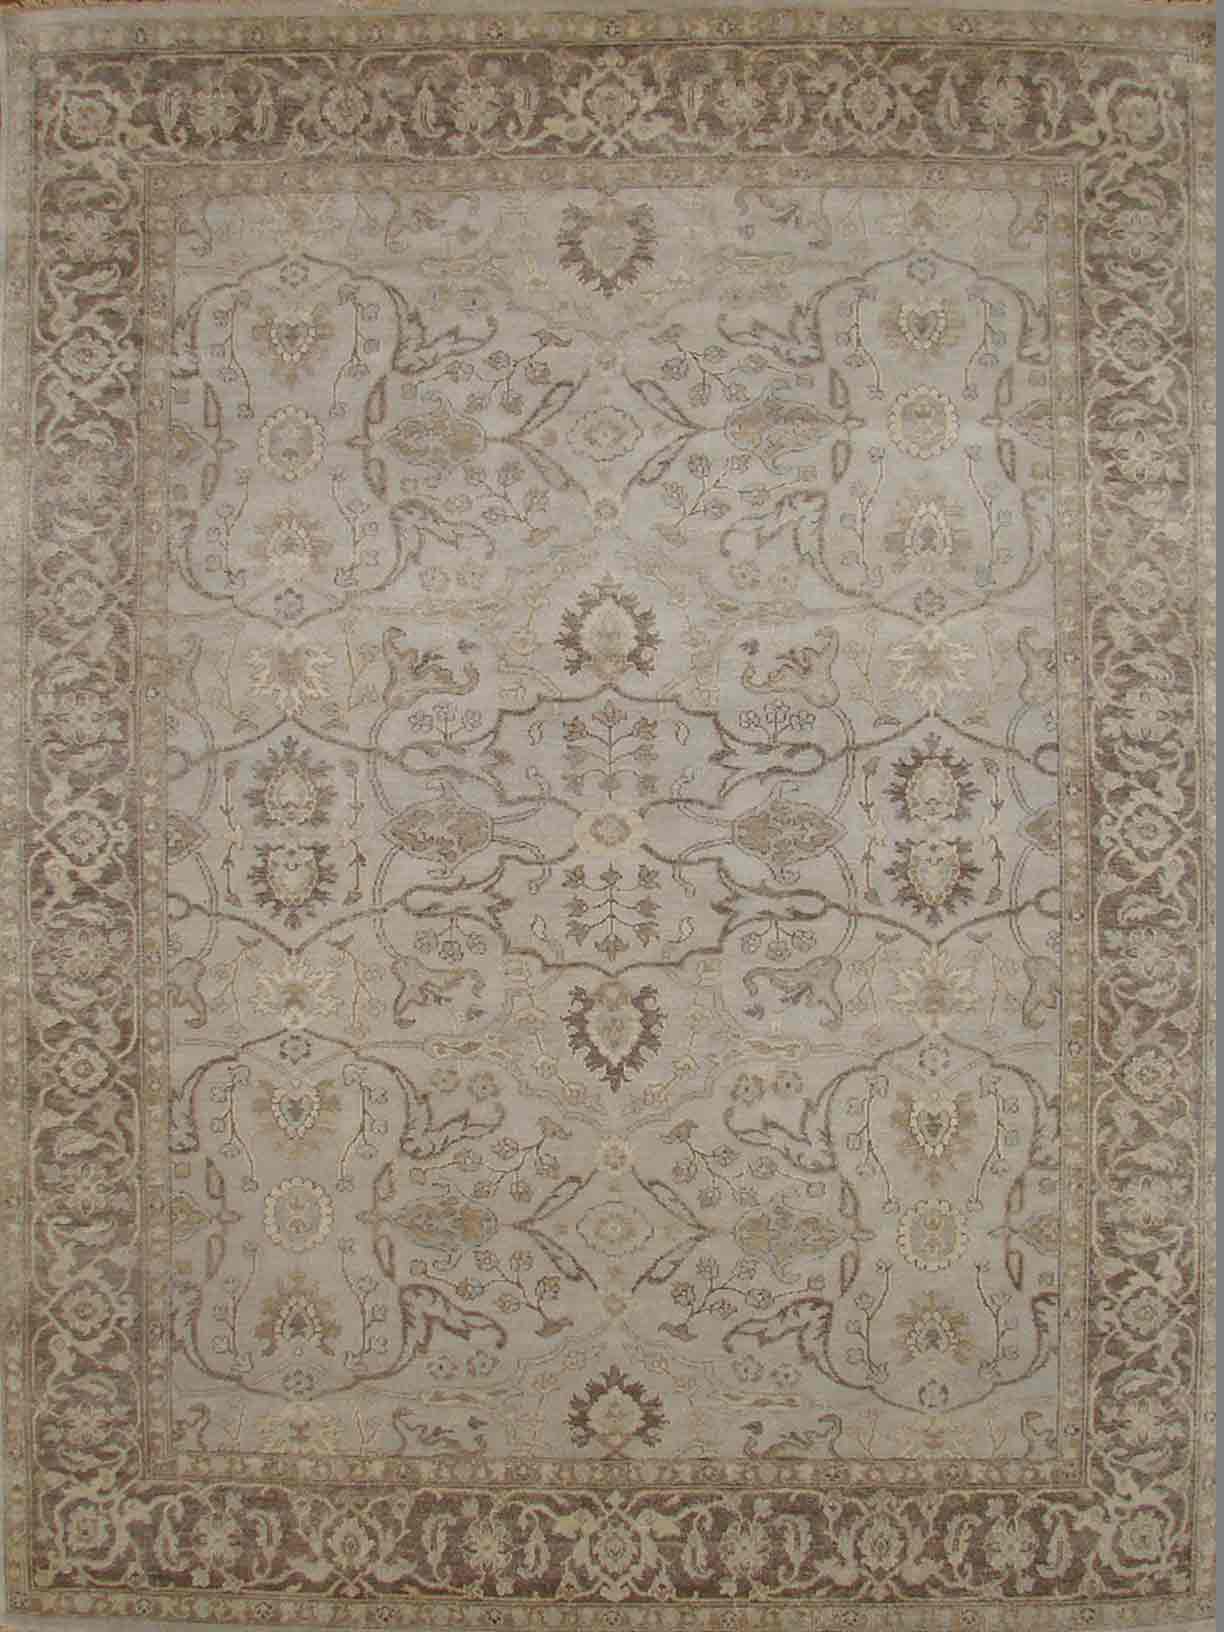 Oushak Rugs TURK-1 19103 Lt. Grey - Grey & Black - Charcoal Hand Knotted Rug